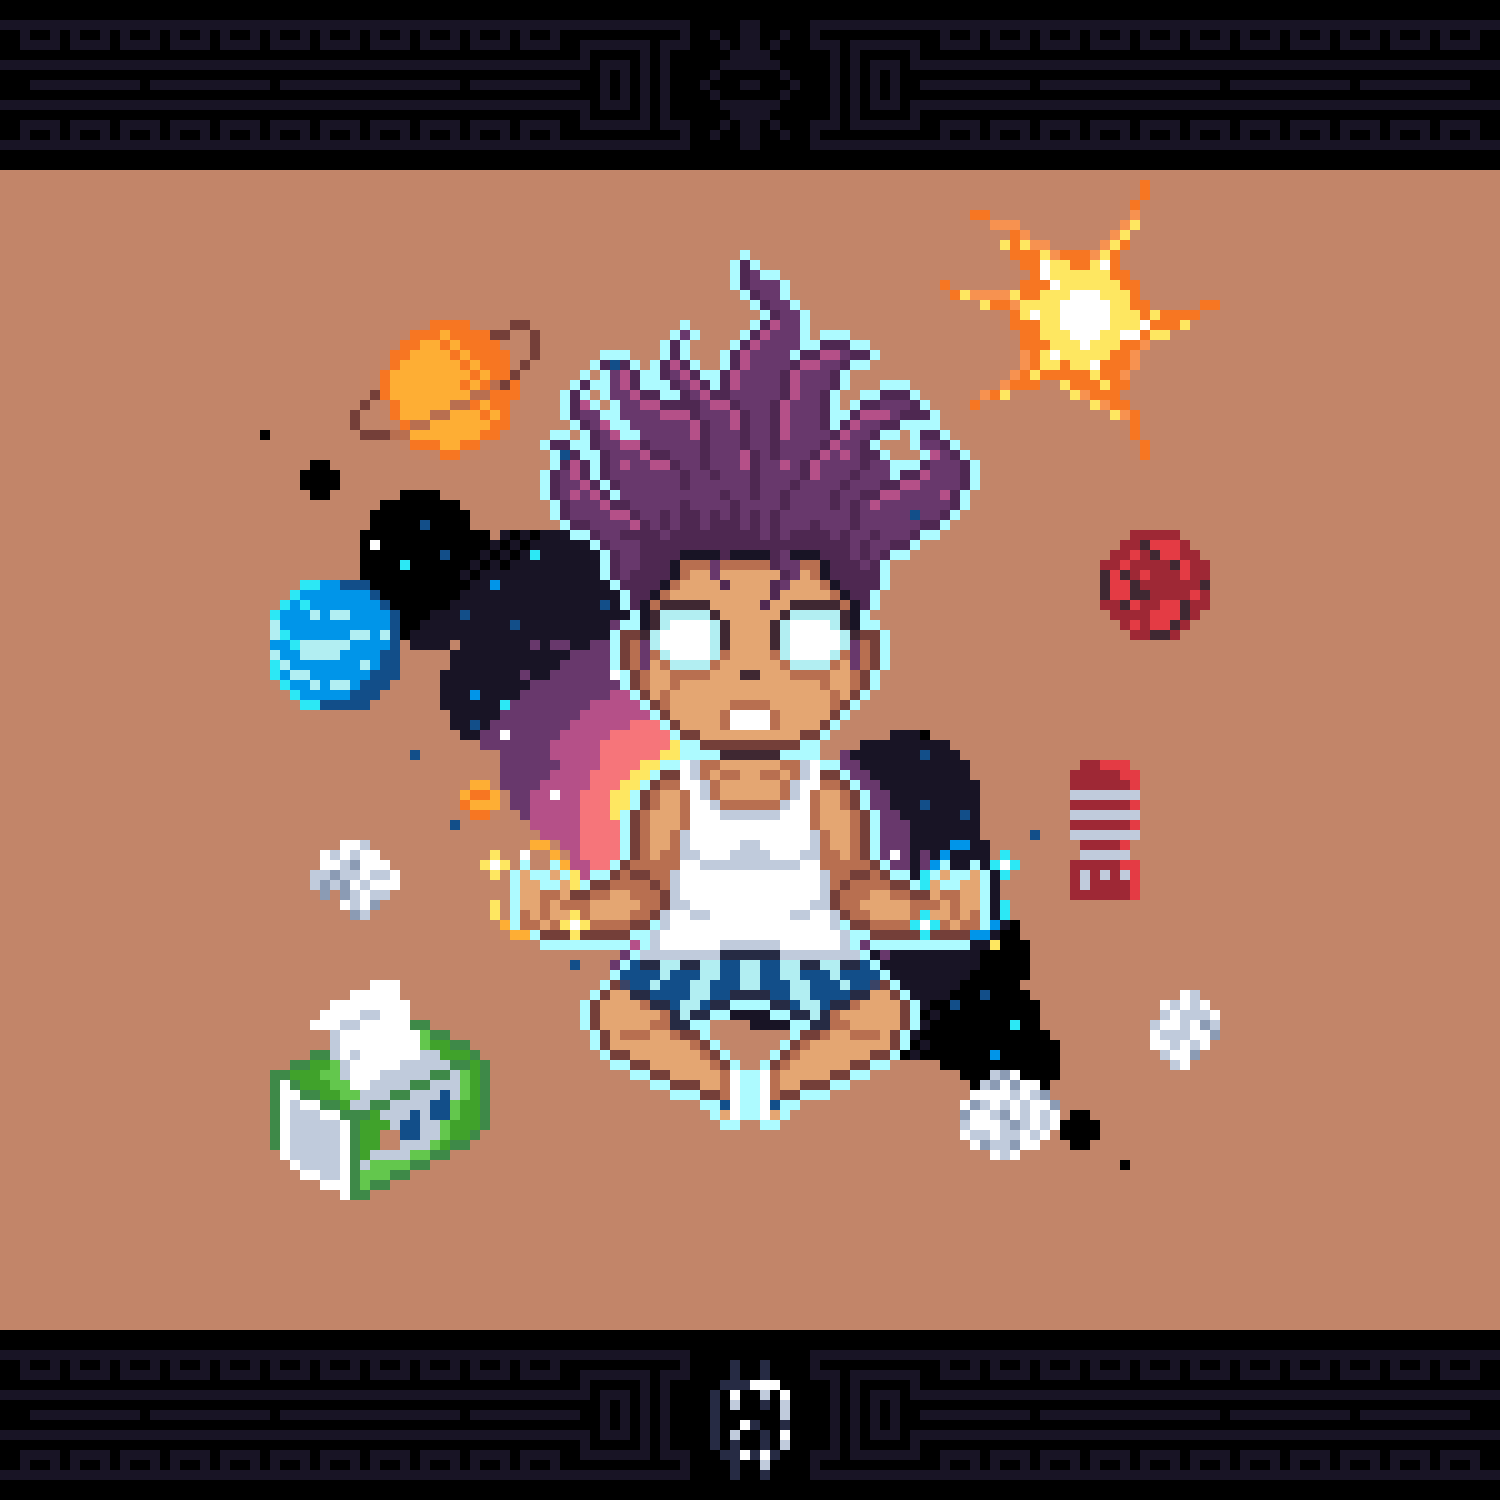 Rick and Morty - PIXEL ART on Behance